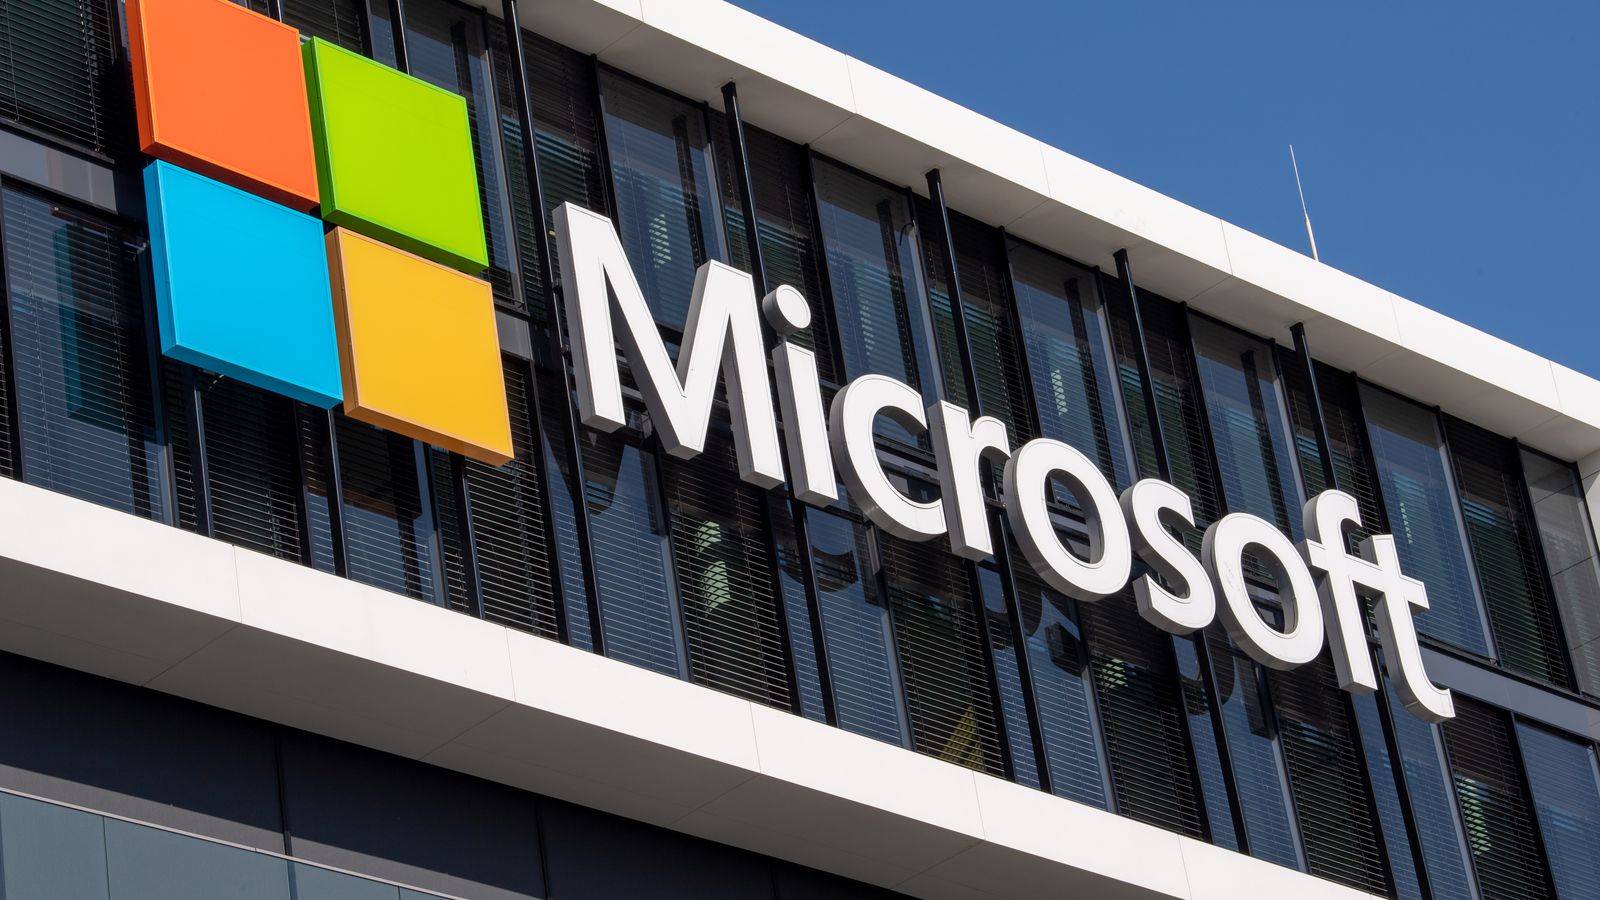 Microsoft will not completely resume its offices until September 7th at the earliest